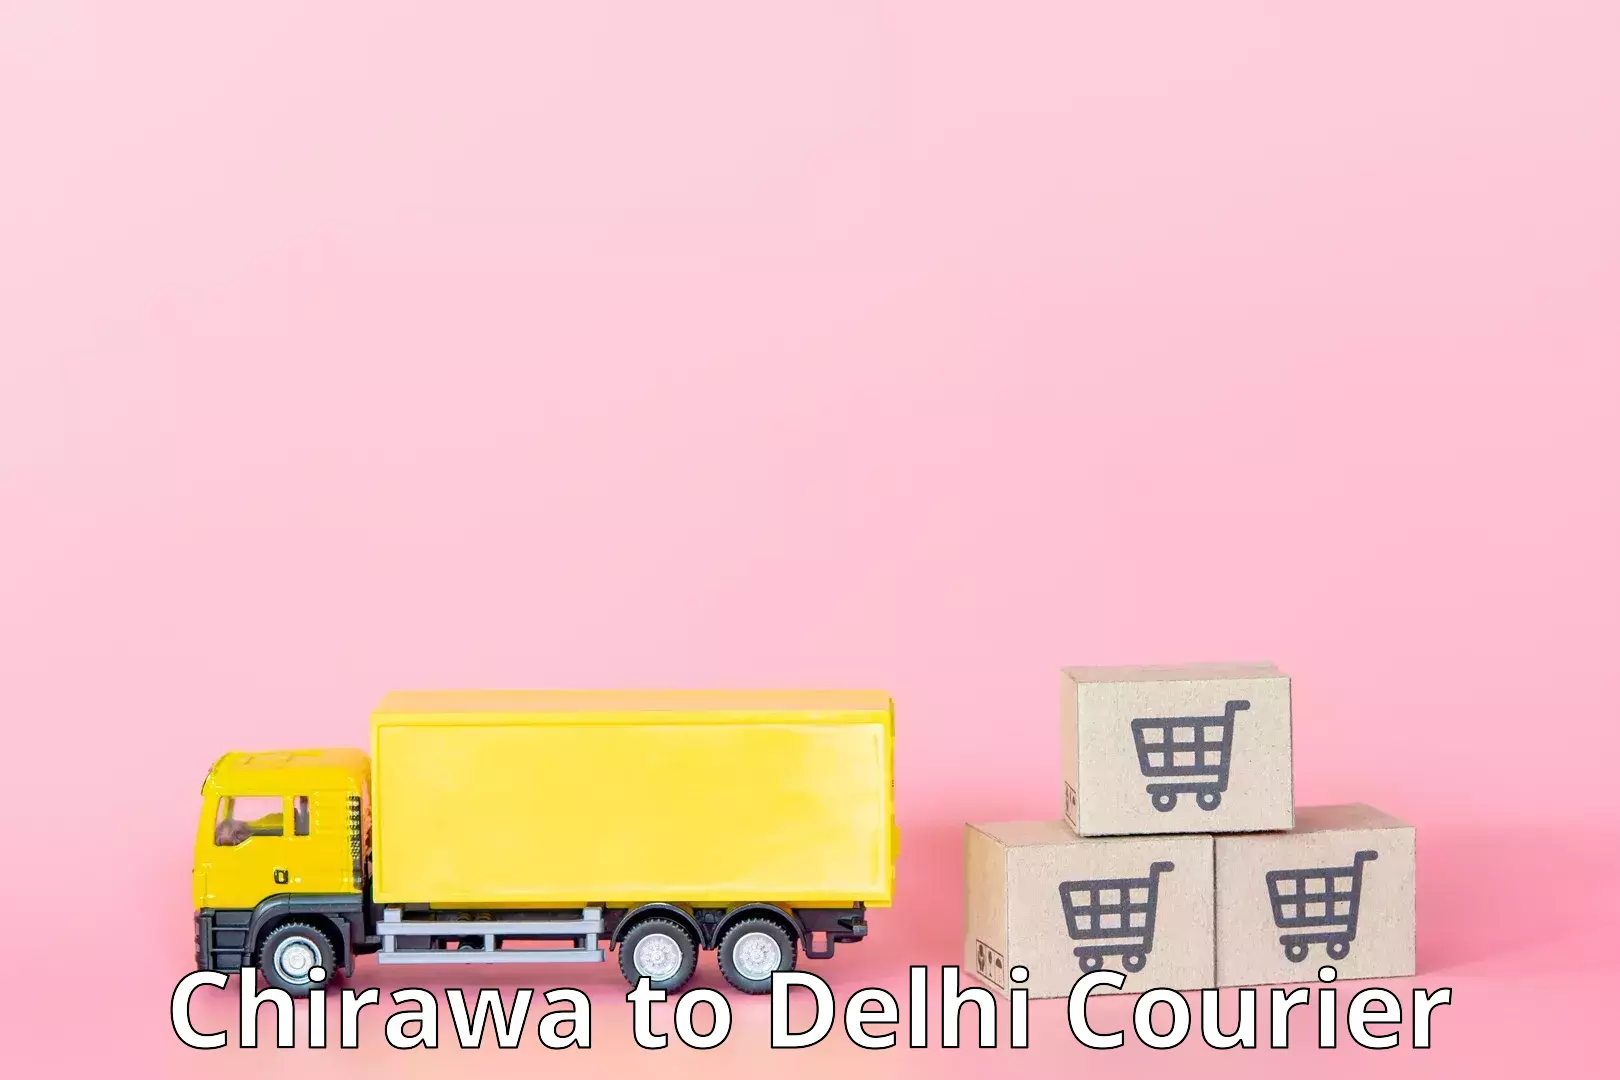 Reliable delivery network Chirawa to East Delhi